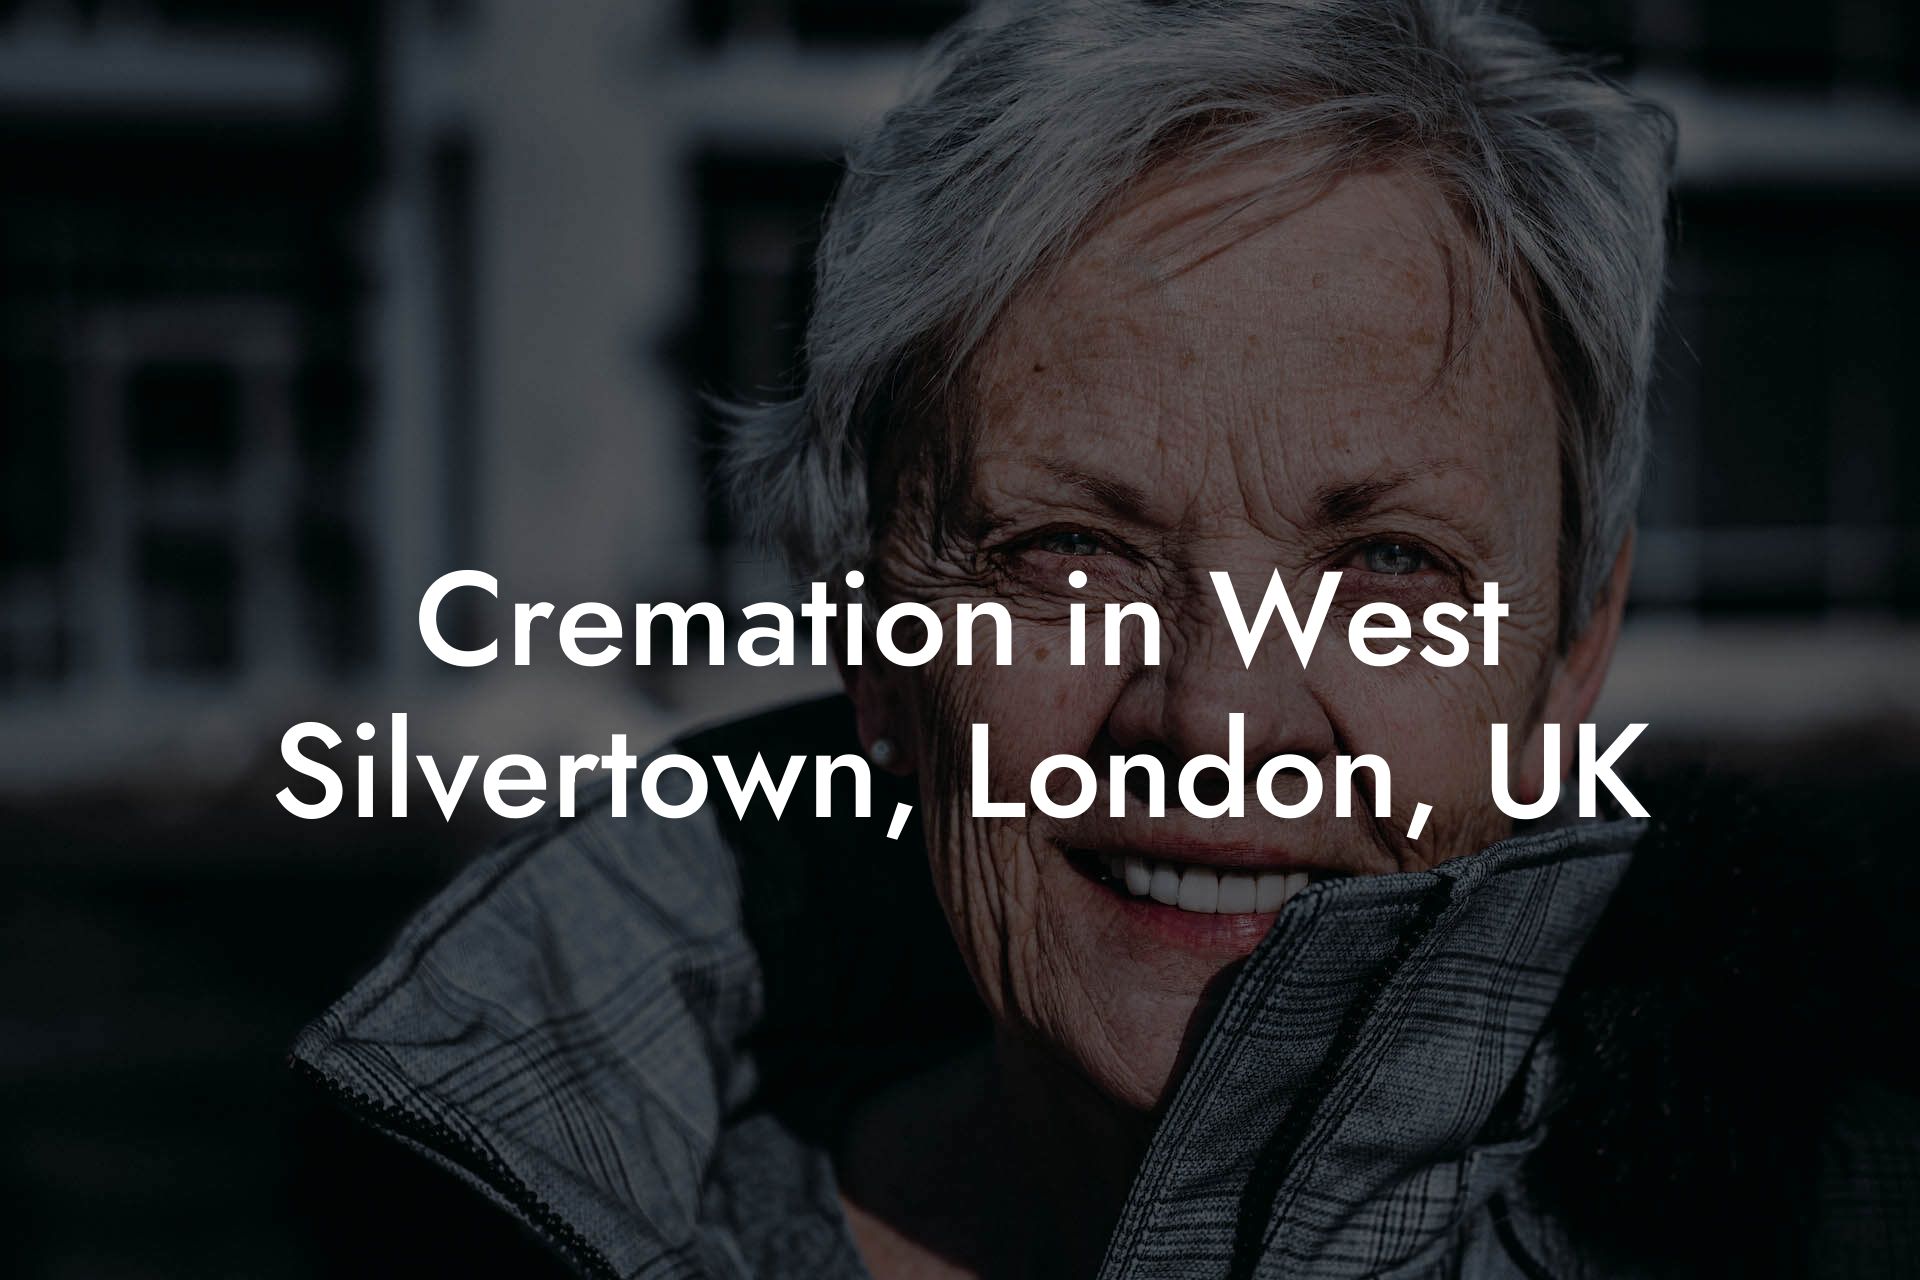 Cremation in West Silvertown, London, UK